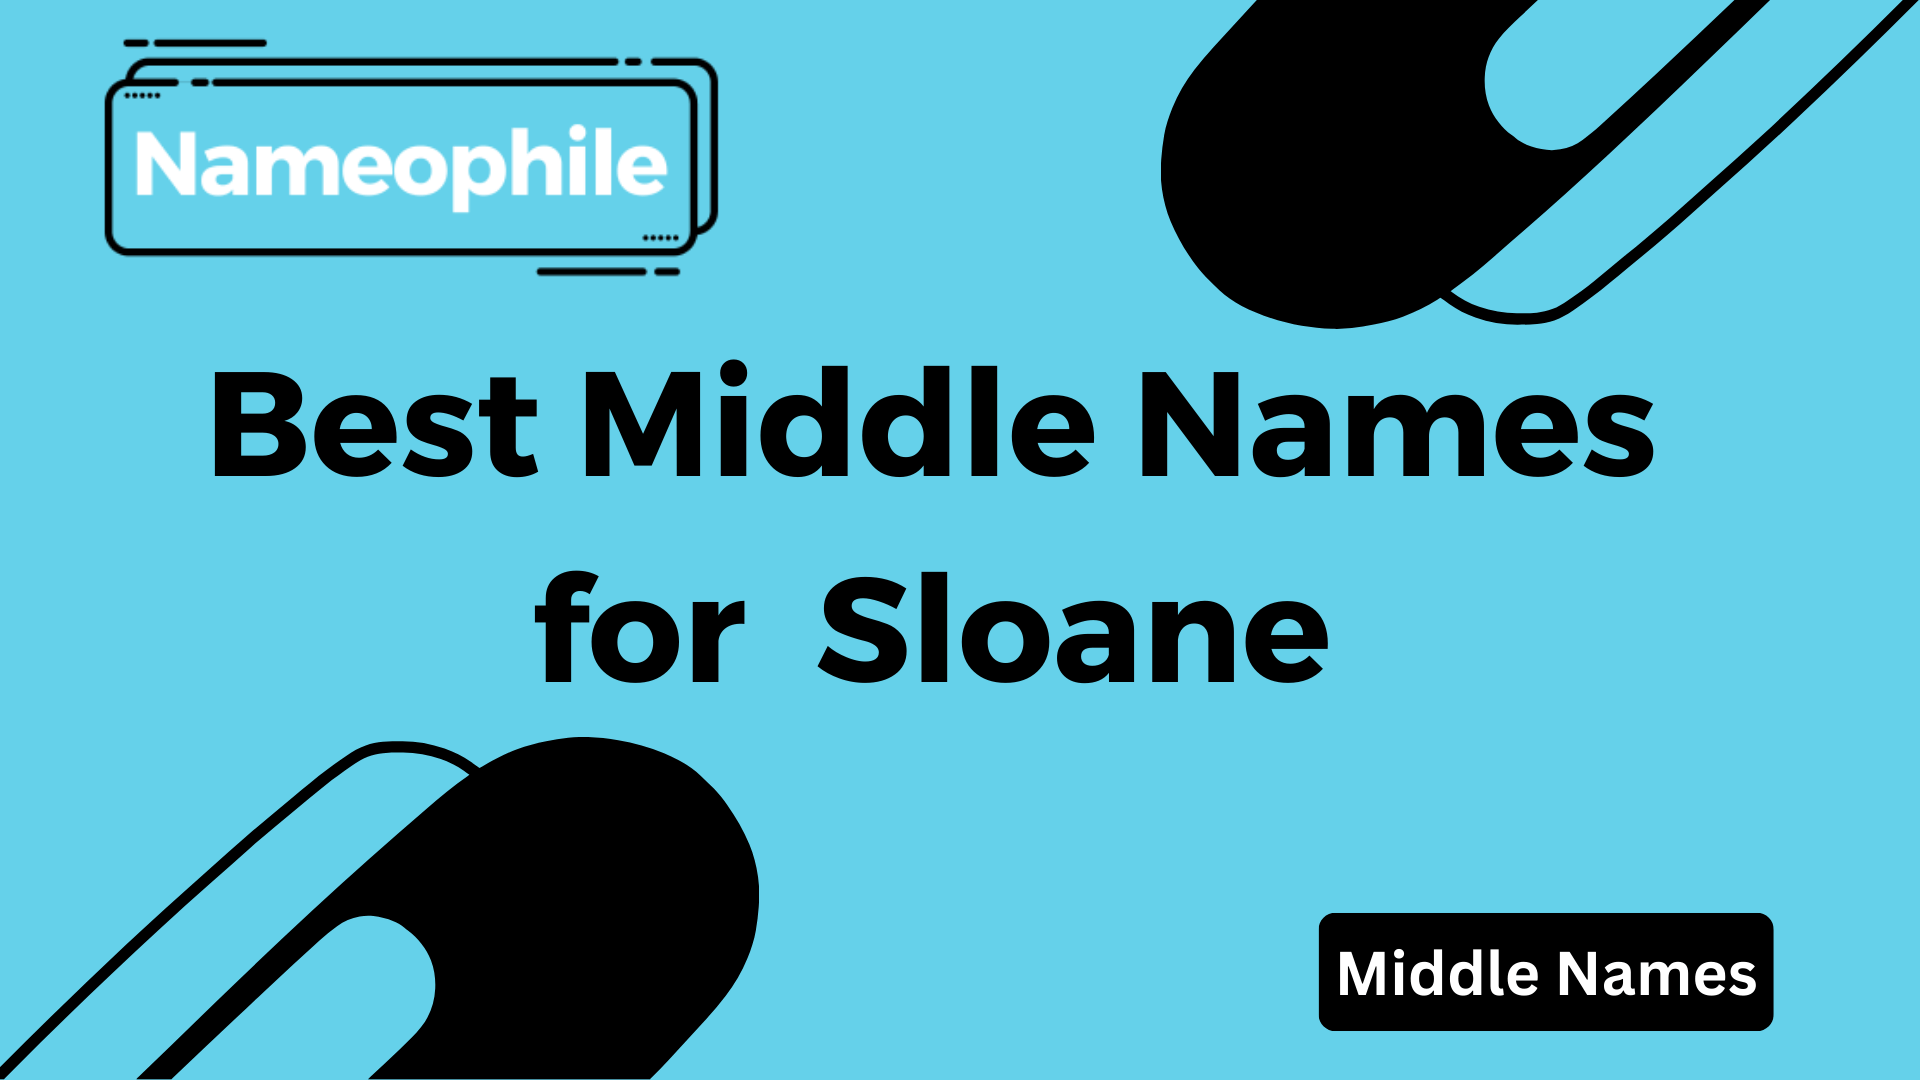 Best Middle Names for Sloane